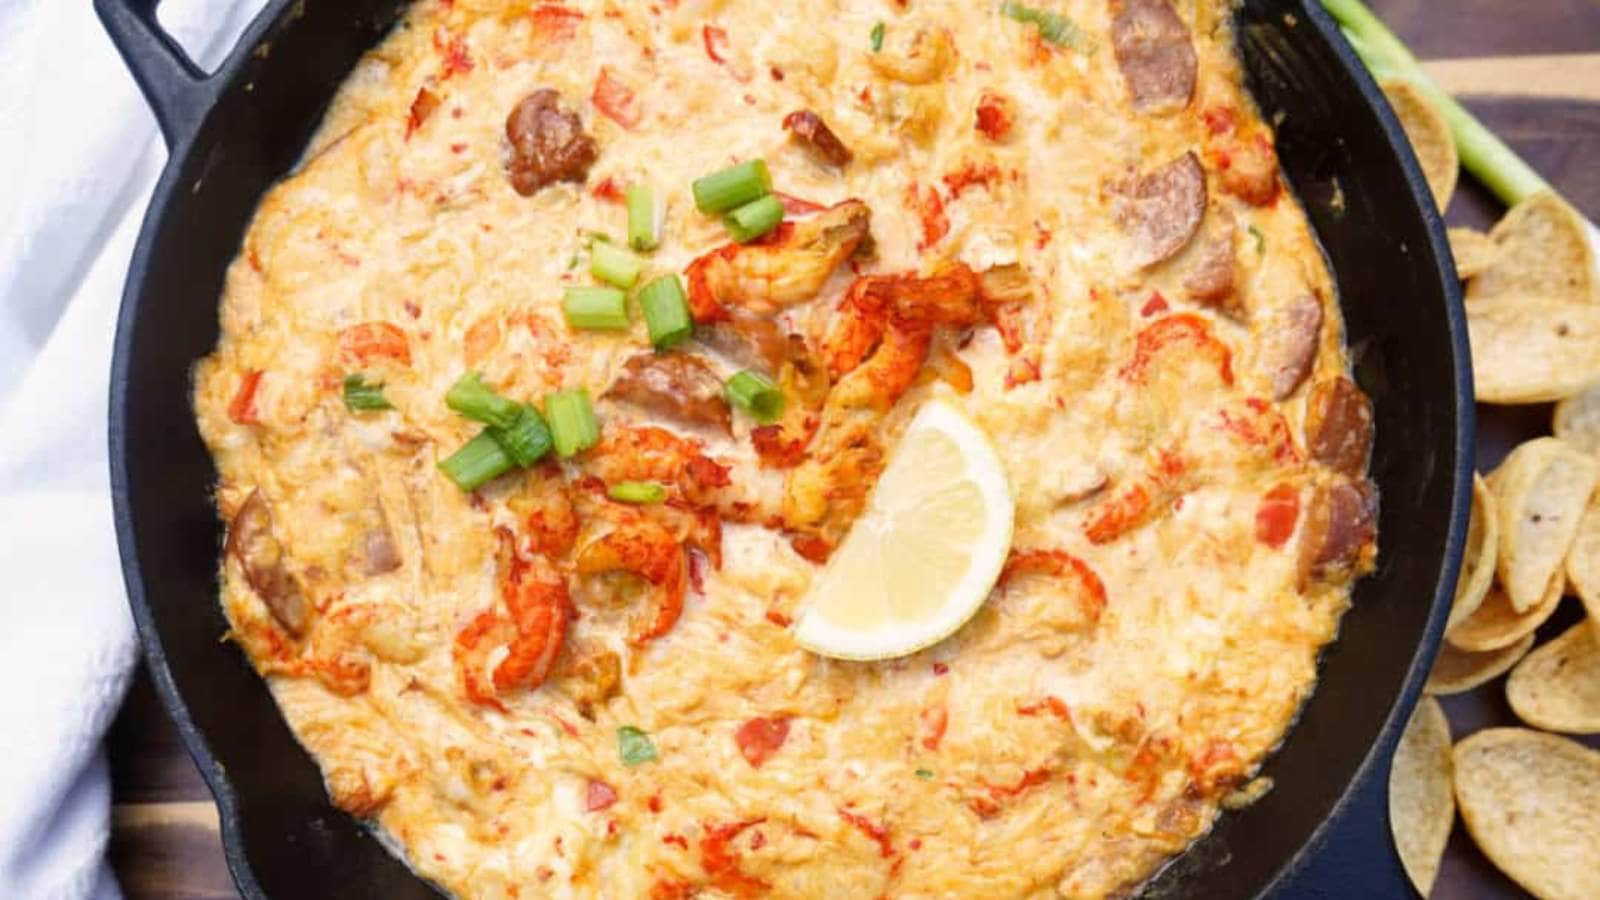 Cajun Smoked Crawfish Dip recipe by Stefs Eats And Sweets.